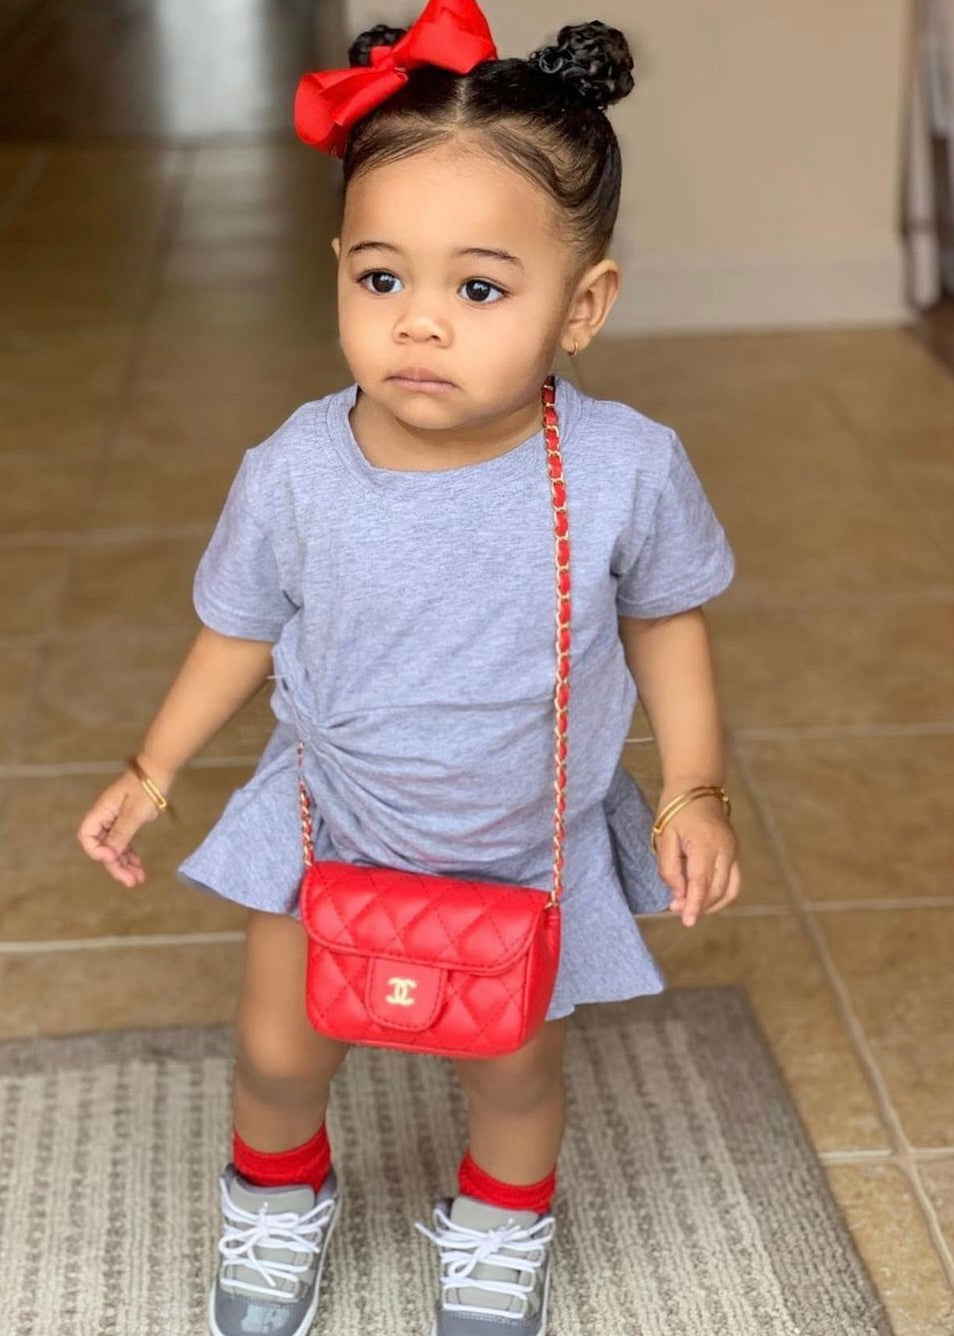 Lv Inspired Toddler Purse Wholesale